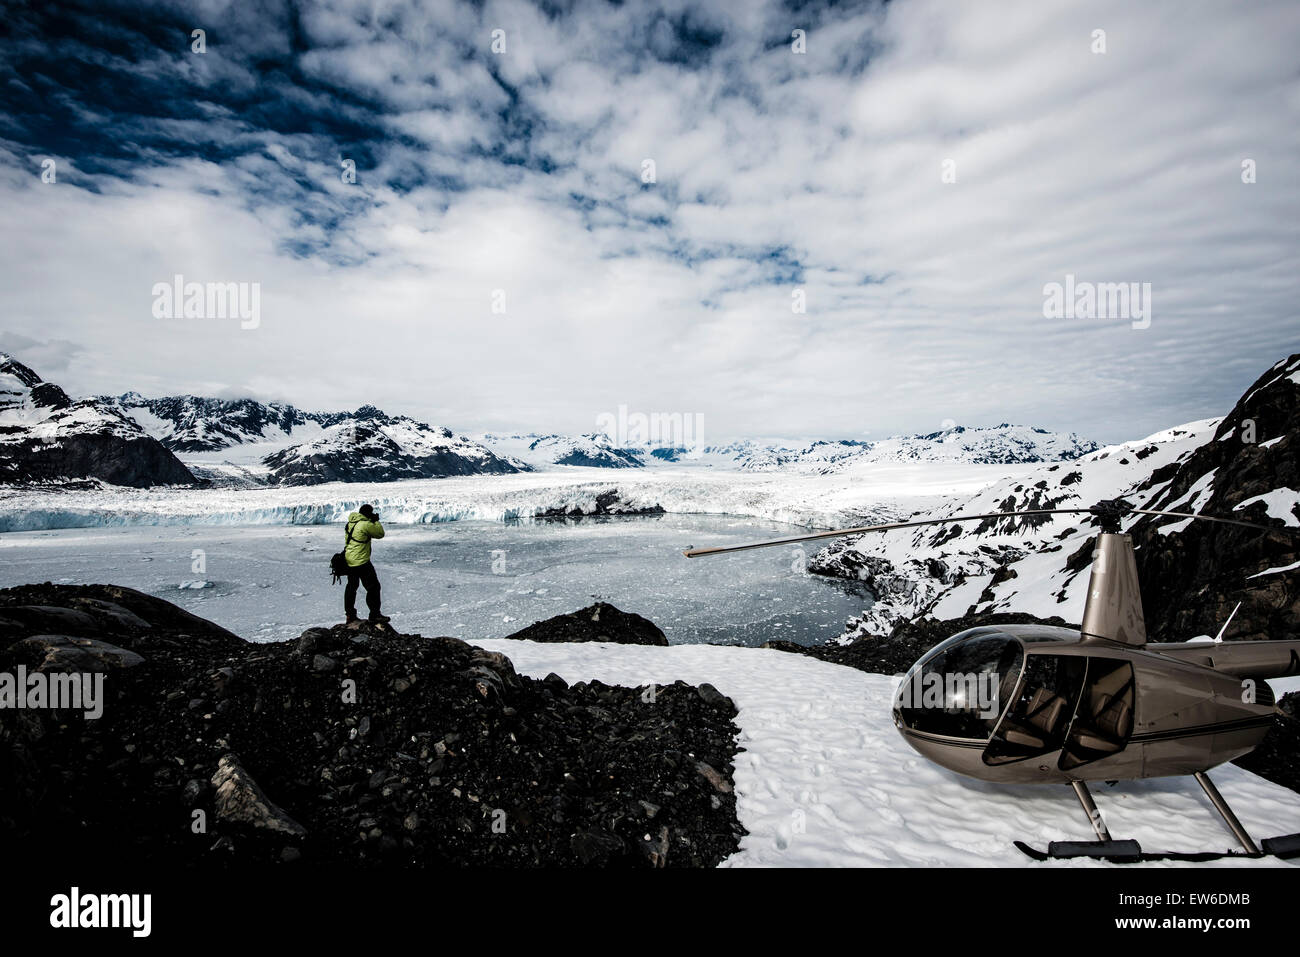 A man taking photos of a melting glacier with a helicopter waiting nearby.   Alaska, USA. Stock Photo